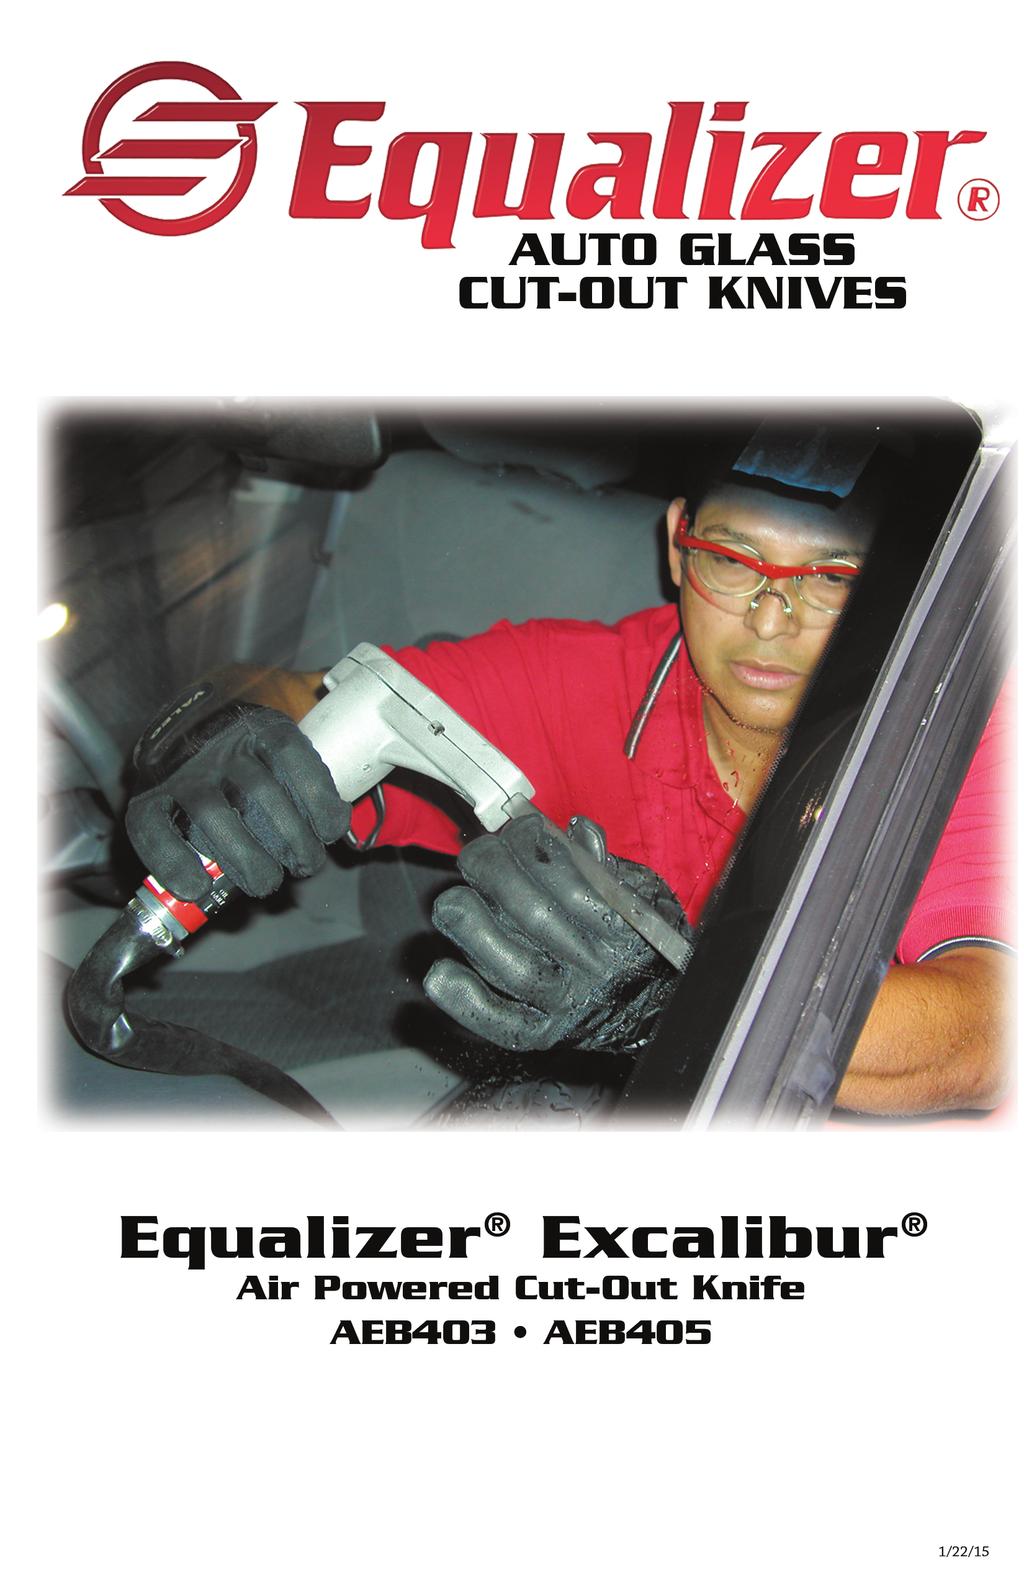 2008 Equalizer Industries, Inc.